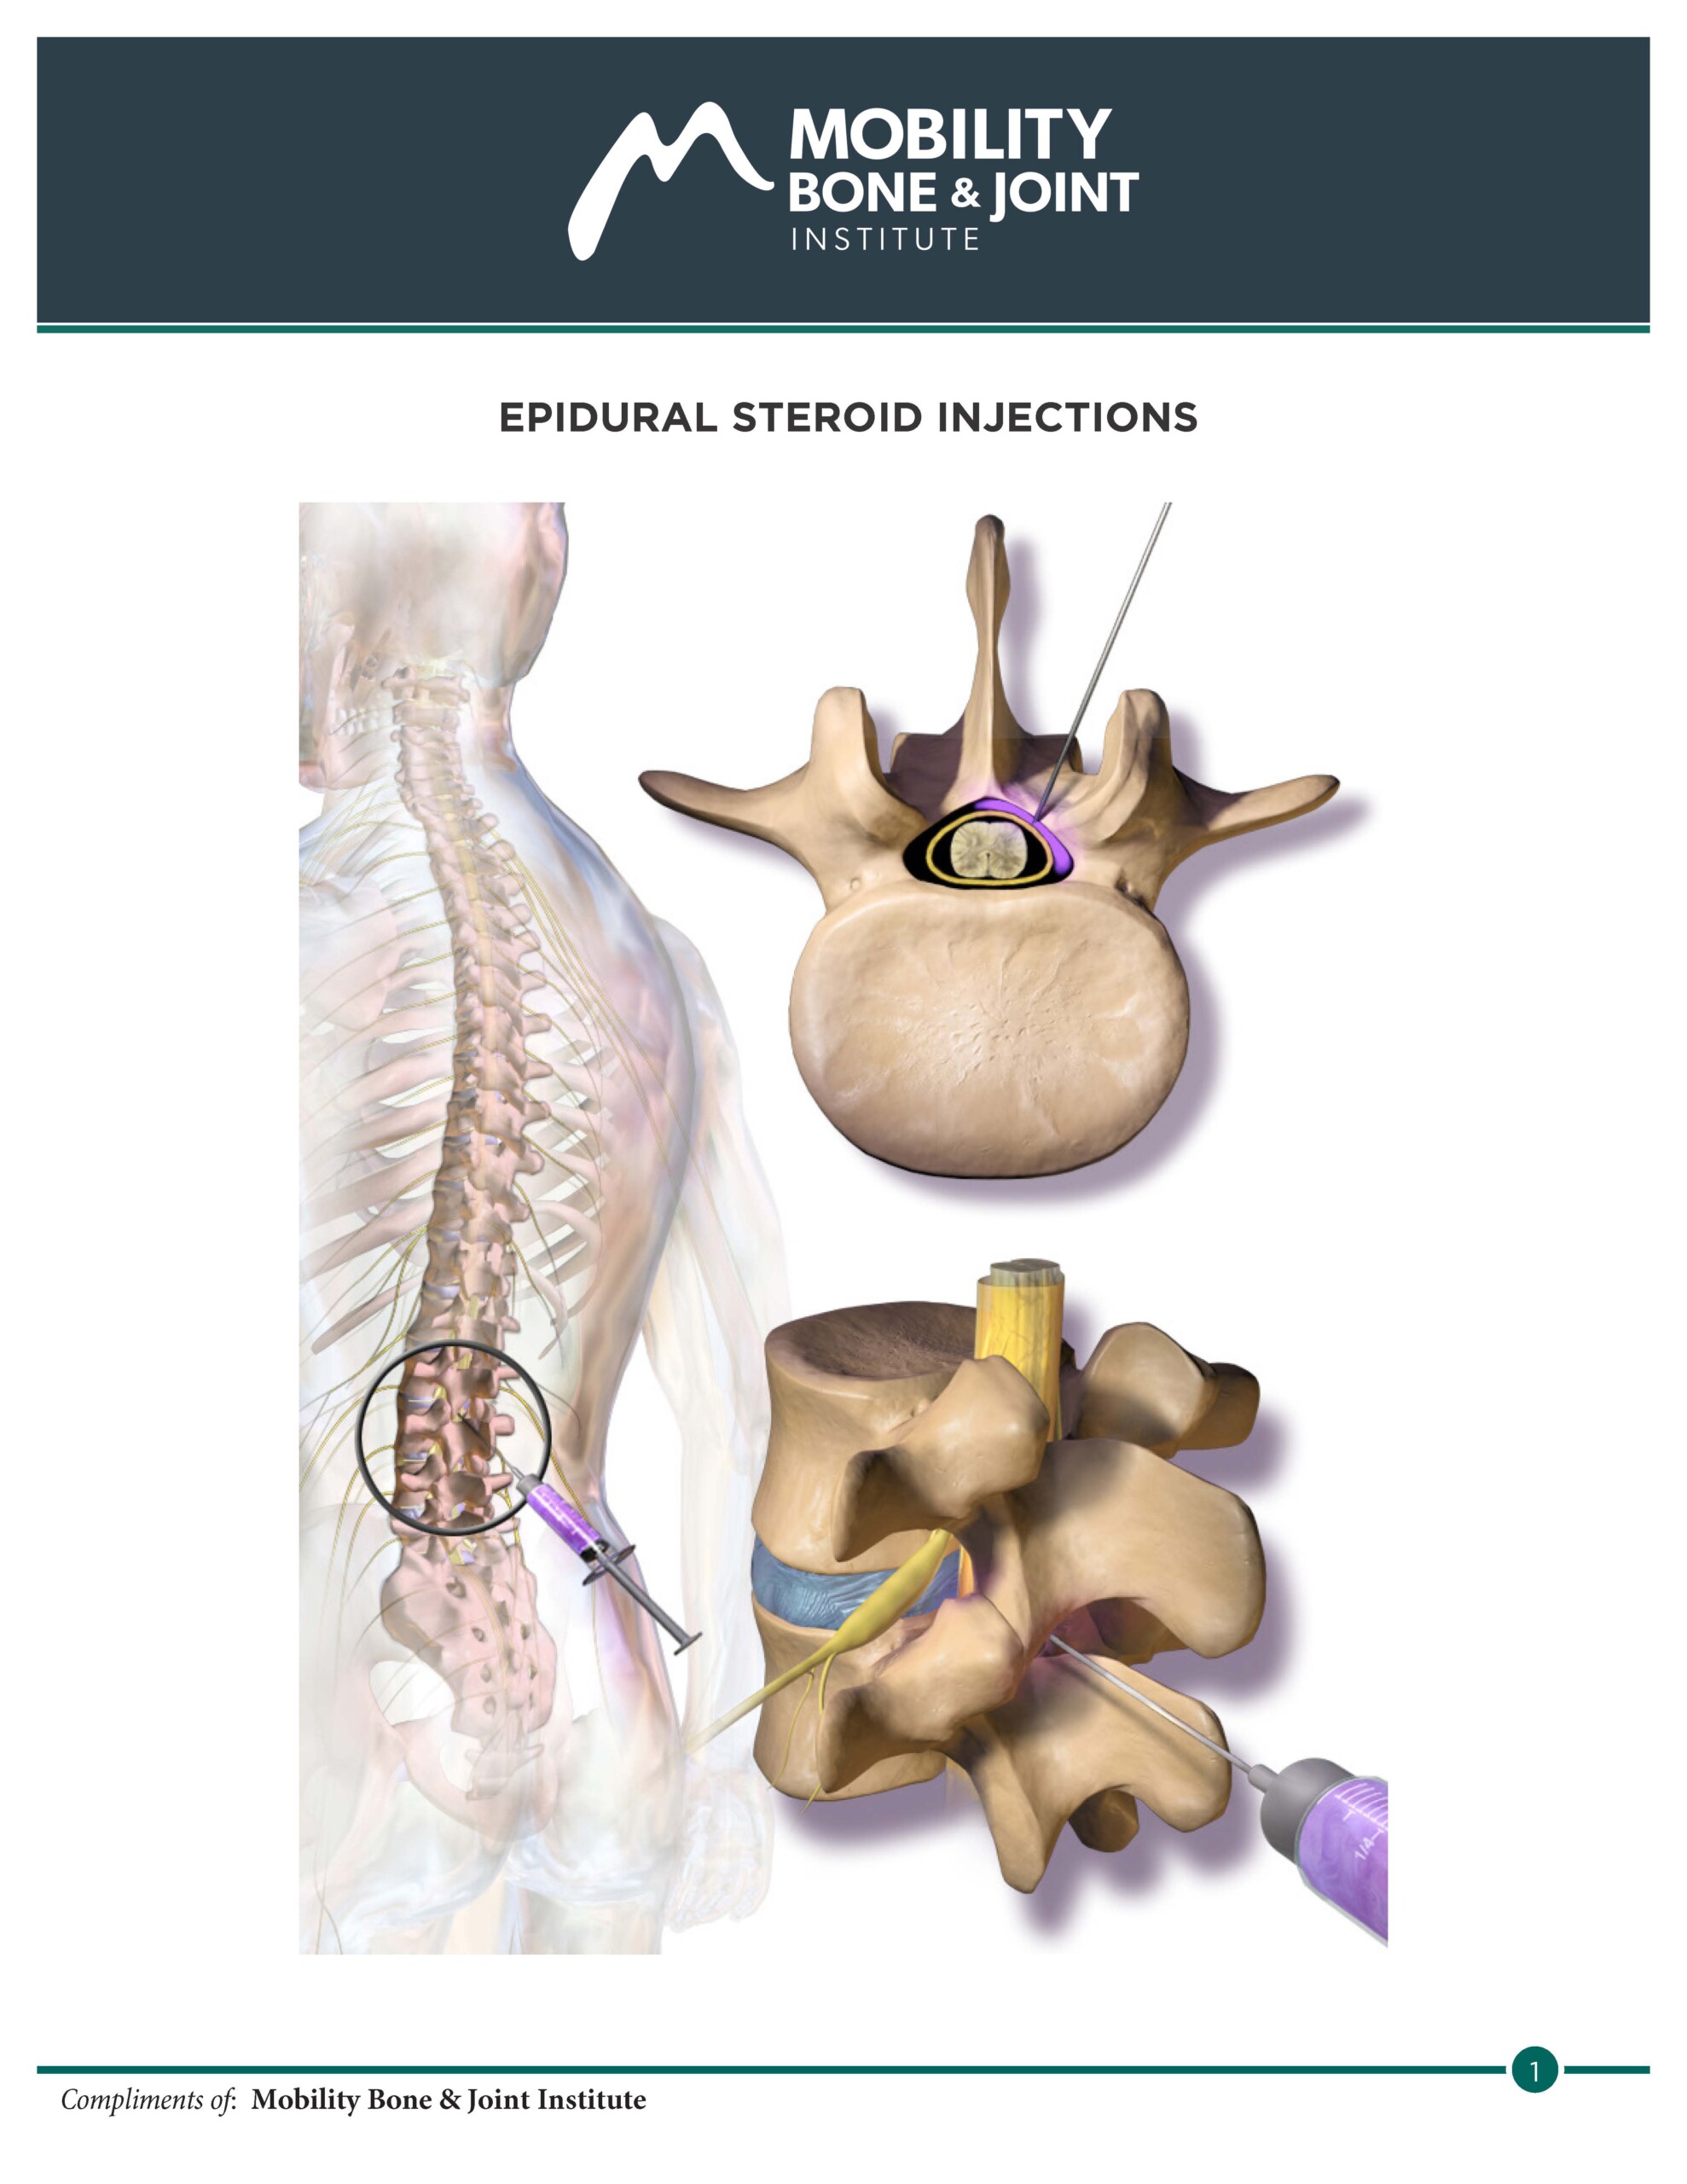 EPIDURAL STEROID INJECTIONS